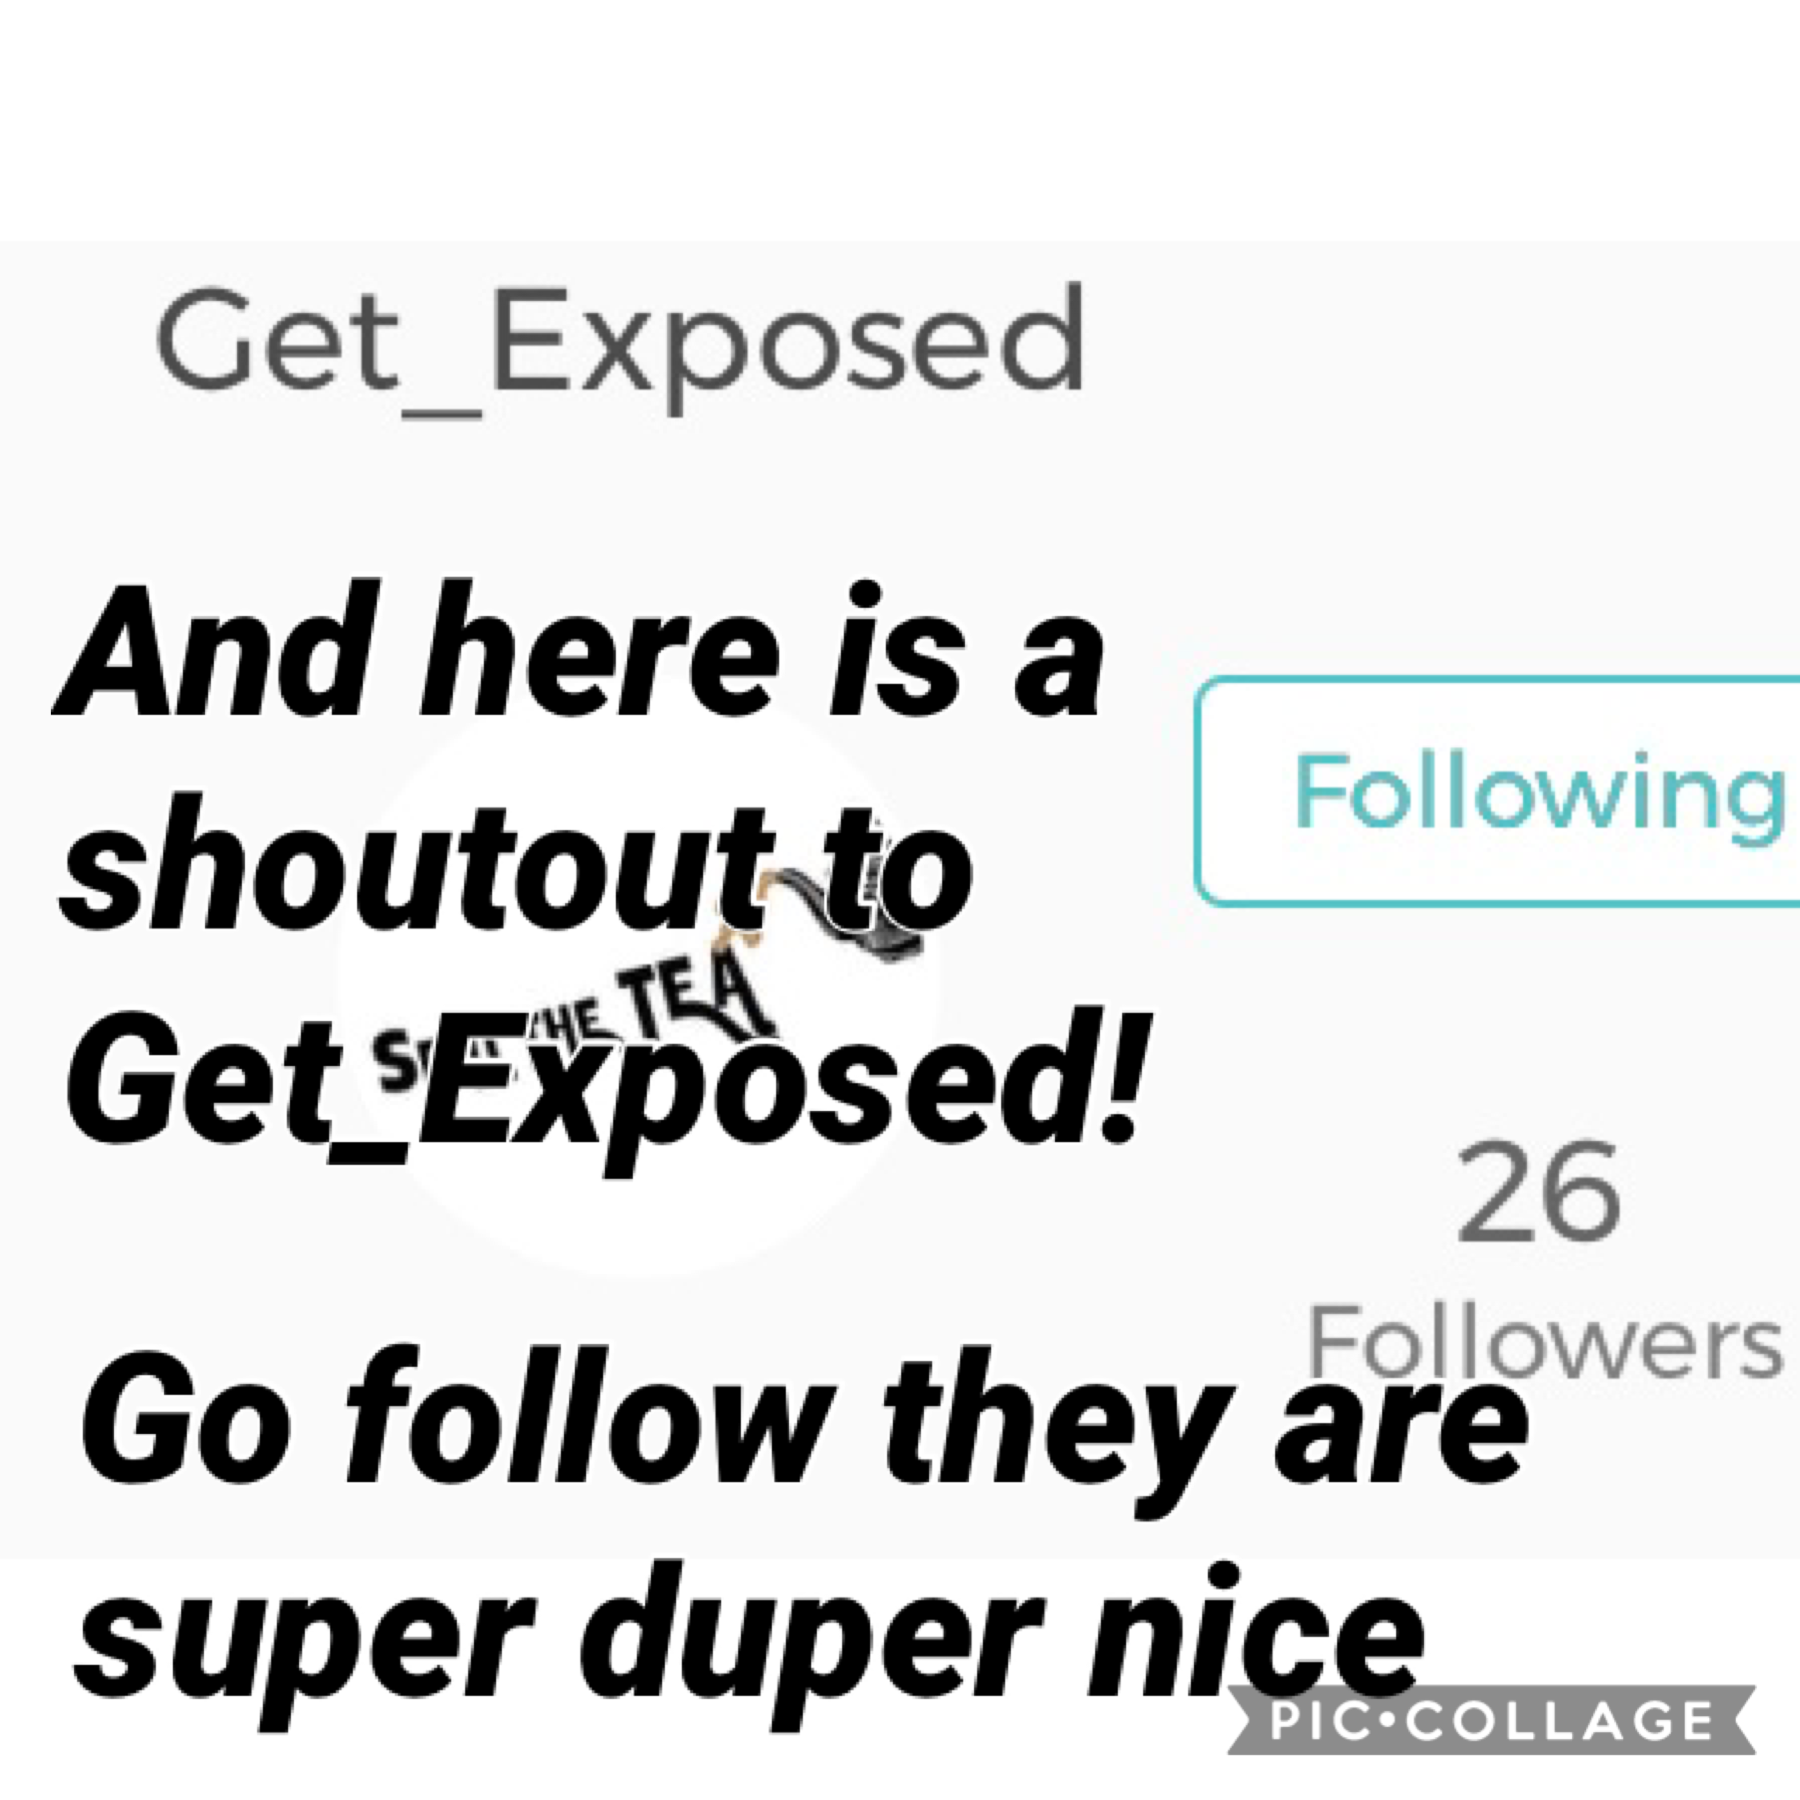 Go follow Get_Exposed they are super duper nice and I wanted to give them a shoutout!